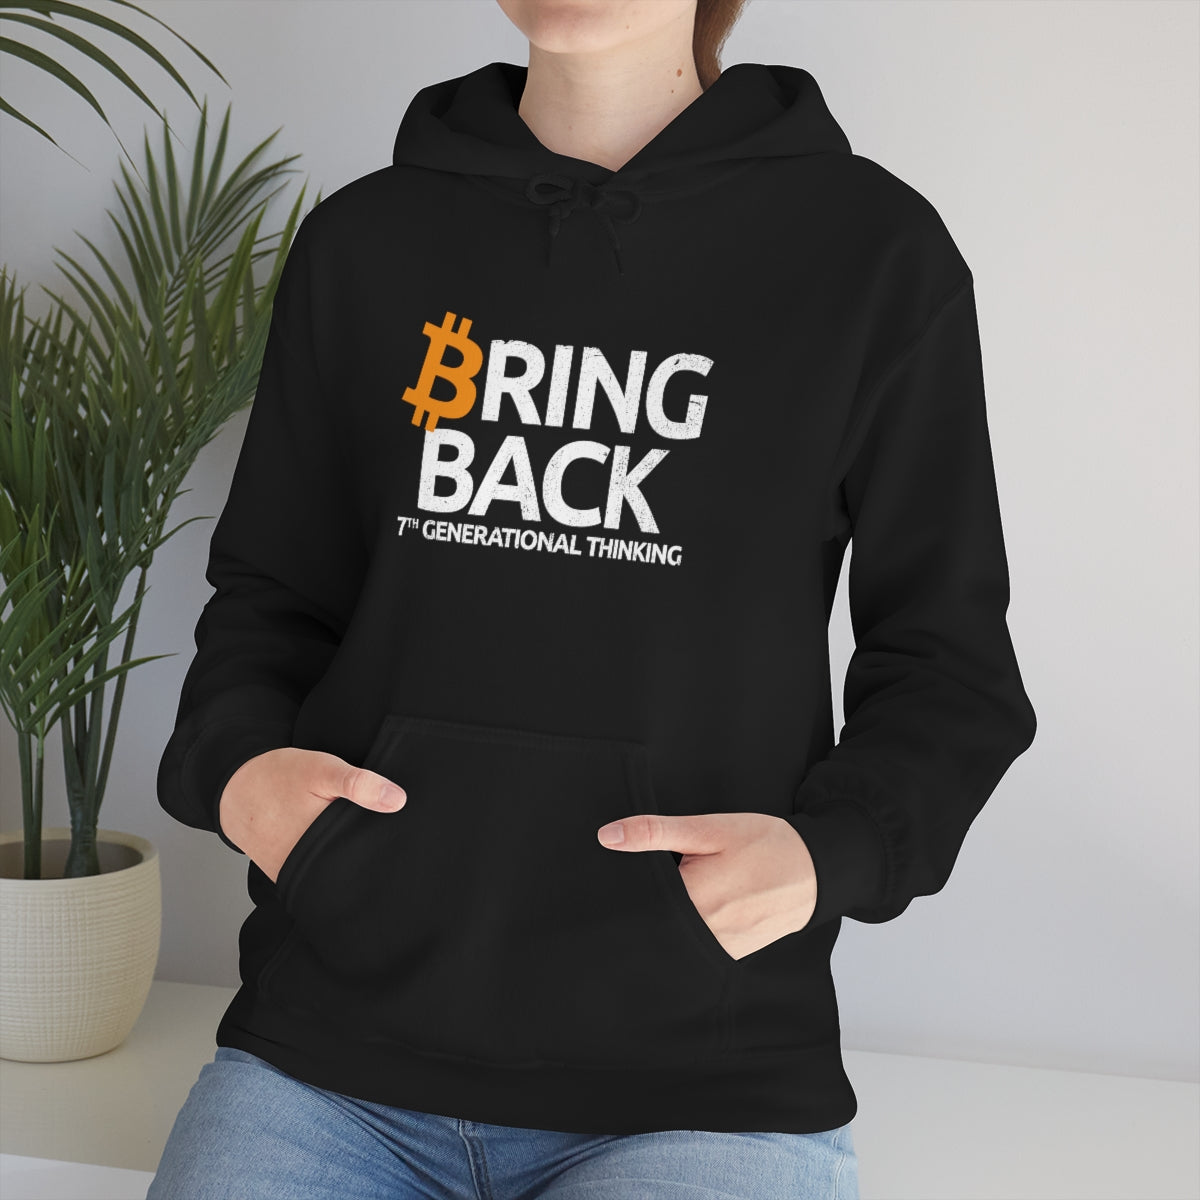 Bring Back 7th Generational Thinking Pullover Hoodie